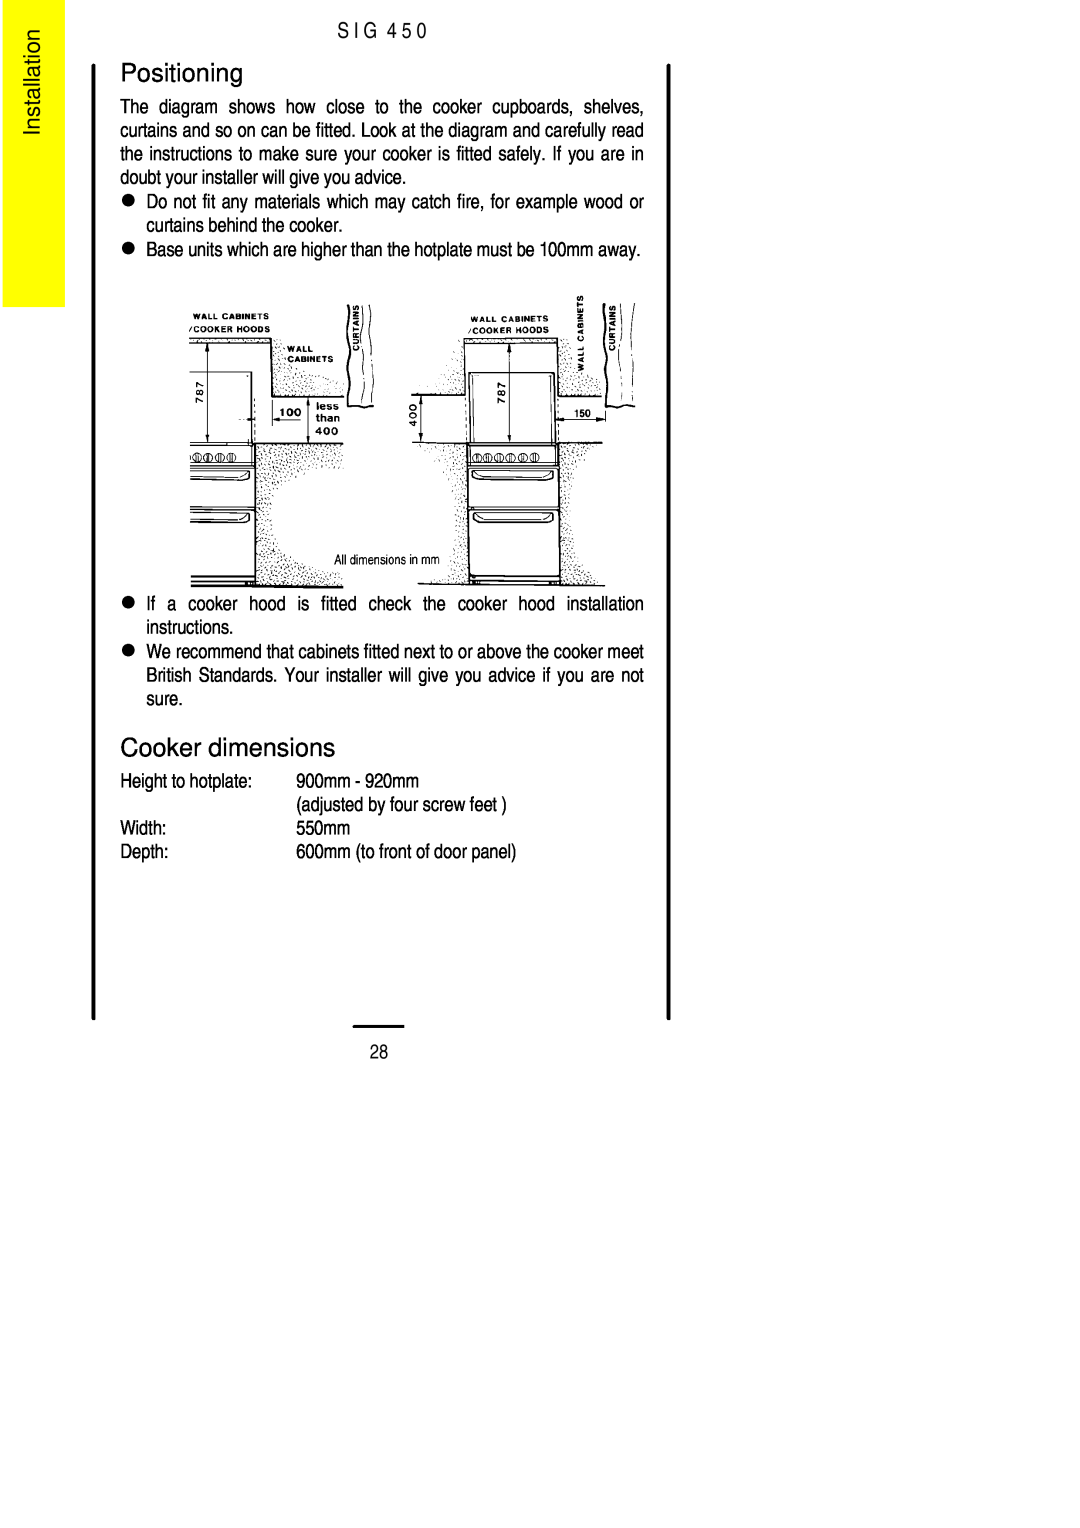 Electrolux SIG 450 installation instructions Positioning, Cooker dimensions, Installation, S I G 4 5 